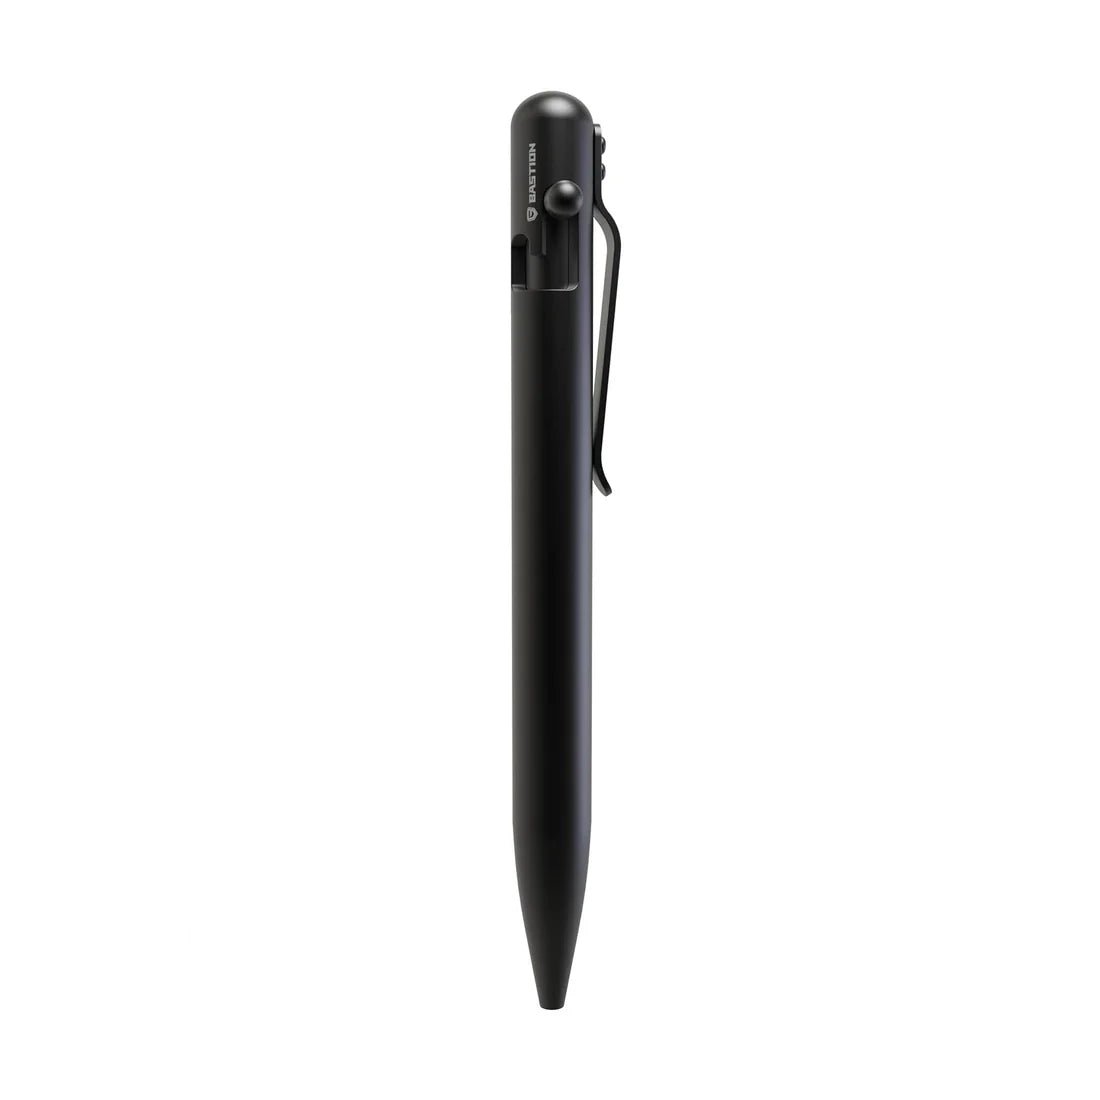 Stainless Steel - Bolt Action Pen by Bastion® - Bastion Bolt Action Pen